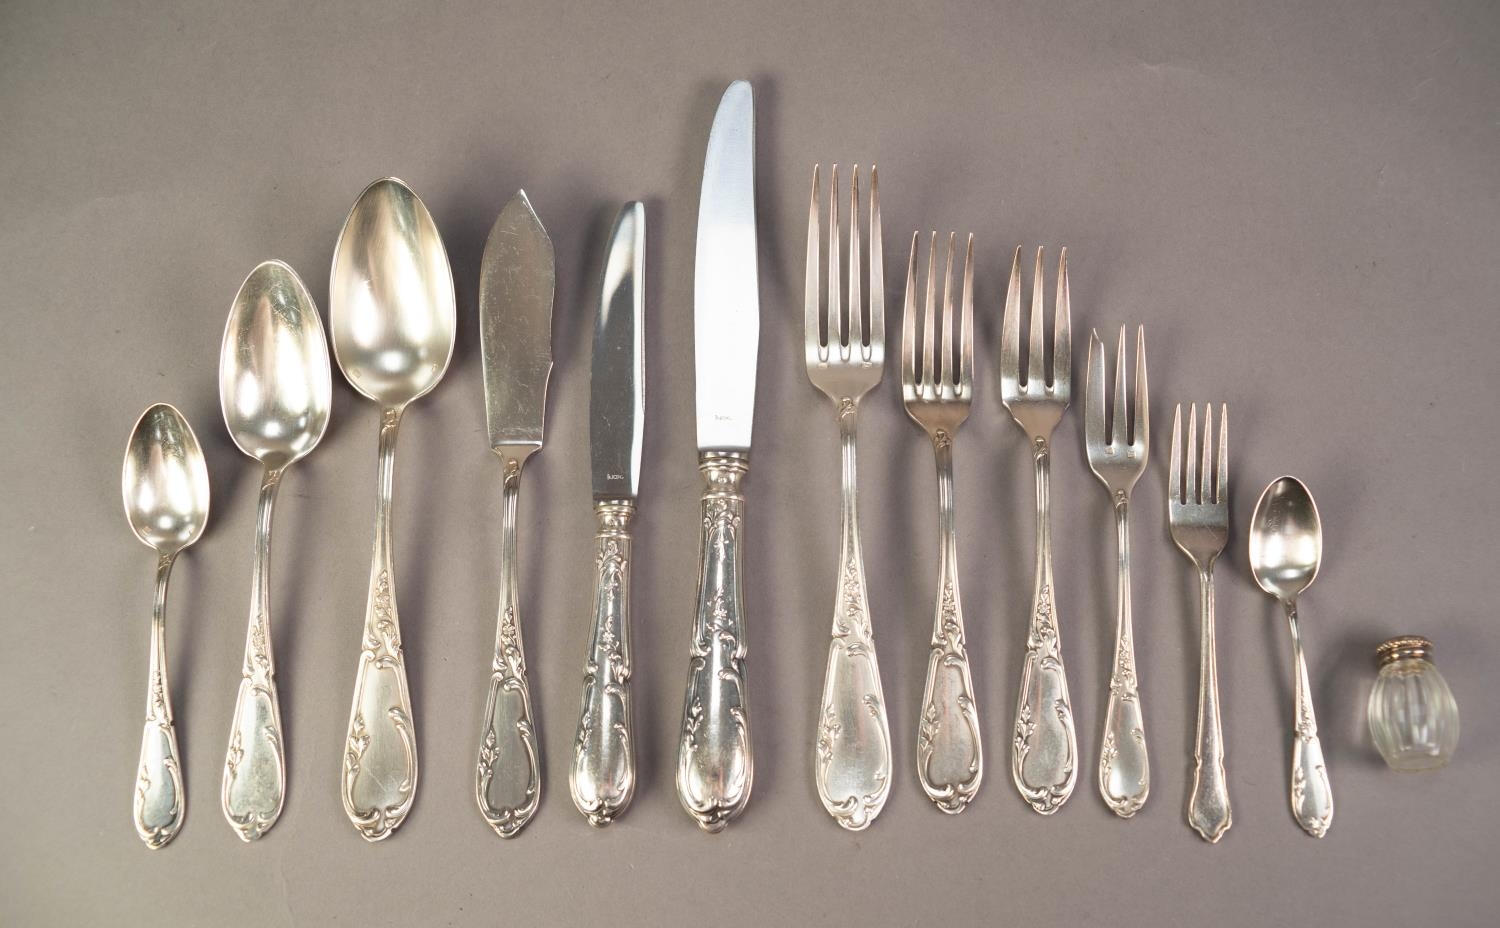 20th CENTURY FRENCH SILVER PLATED 128 PIECE TABLE SERVICE FOR TWELVE PERSONS comprising 12 table